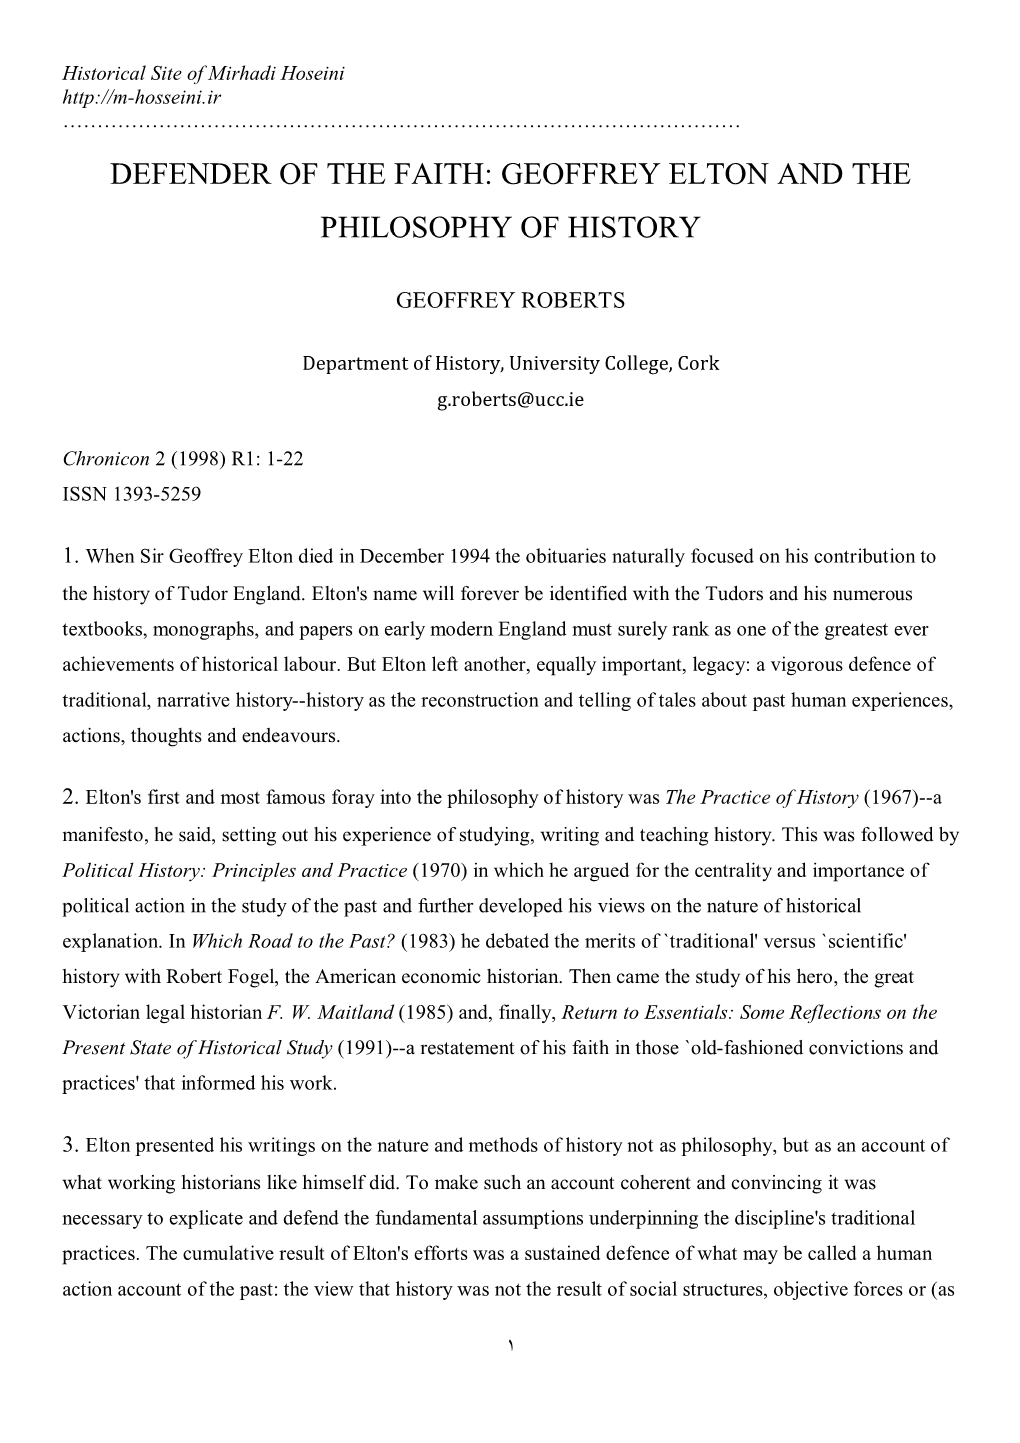 Geoffrey Elton and the Philosophy of History